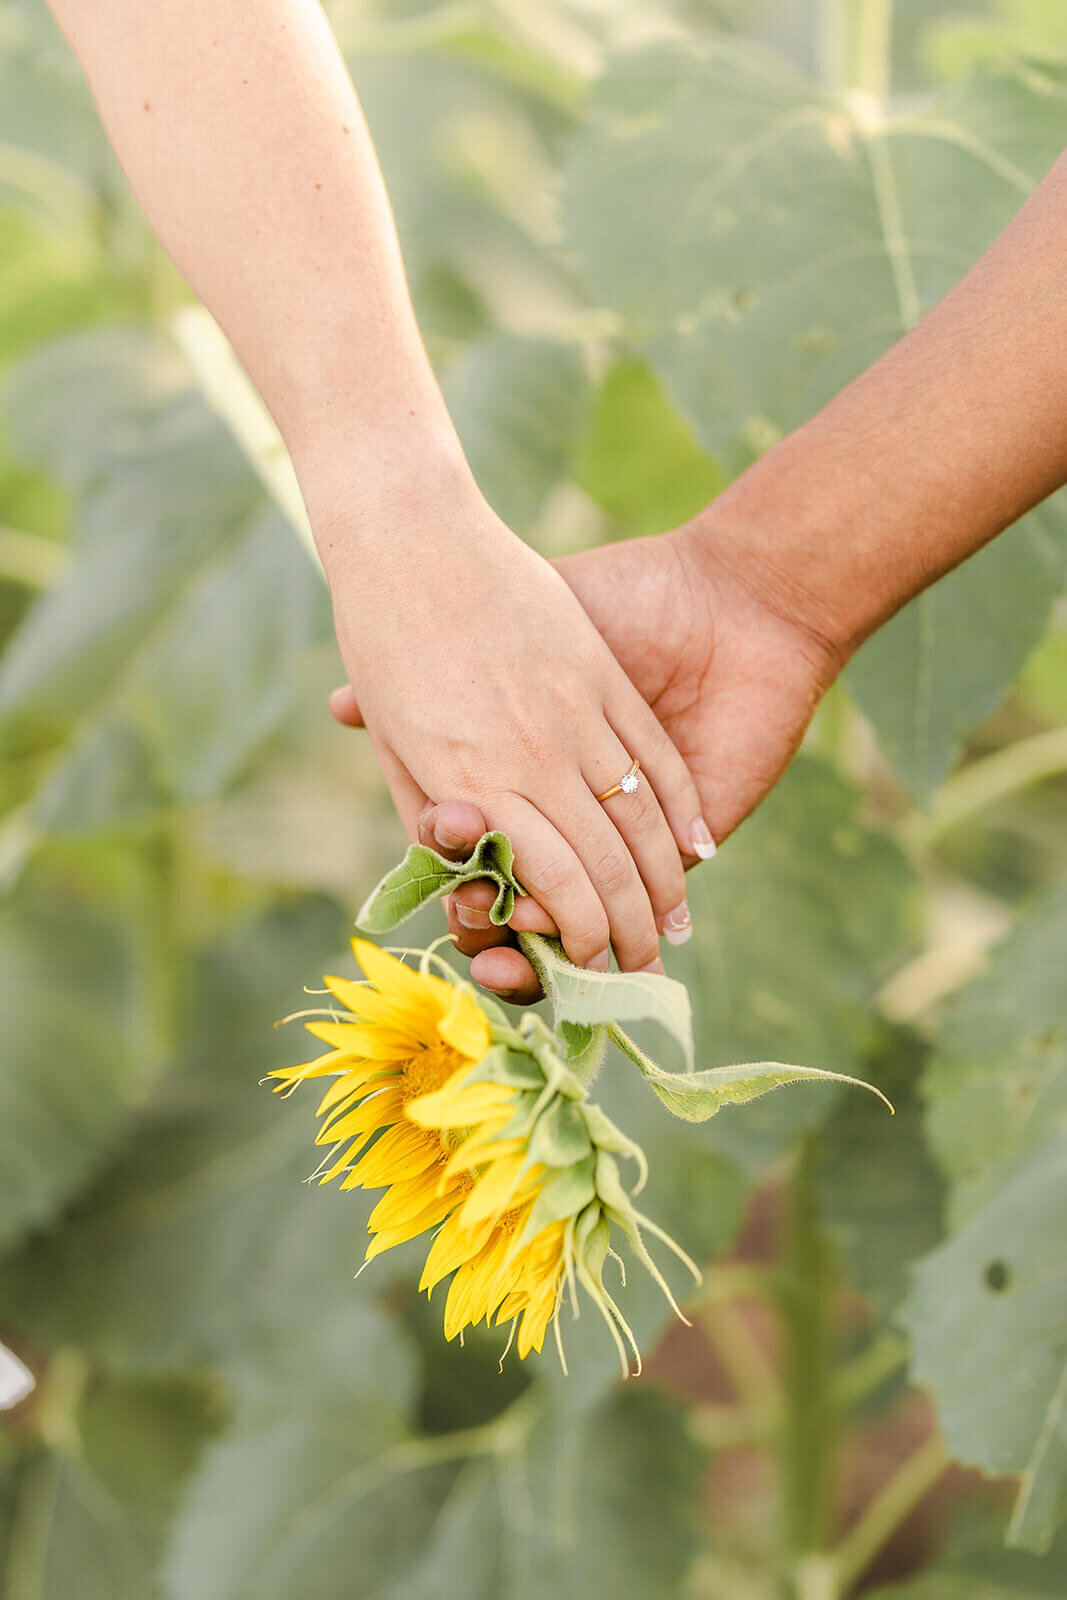 couple holding a sunflower with diamond ring in hand taken at sunflower farm near brisbane